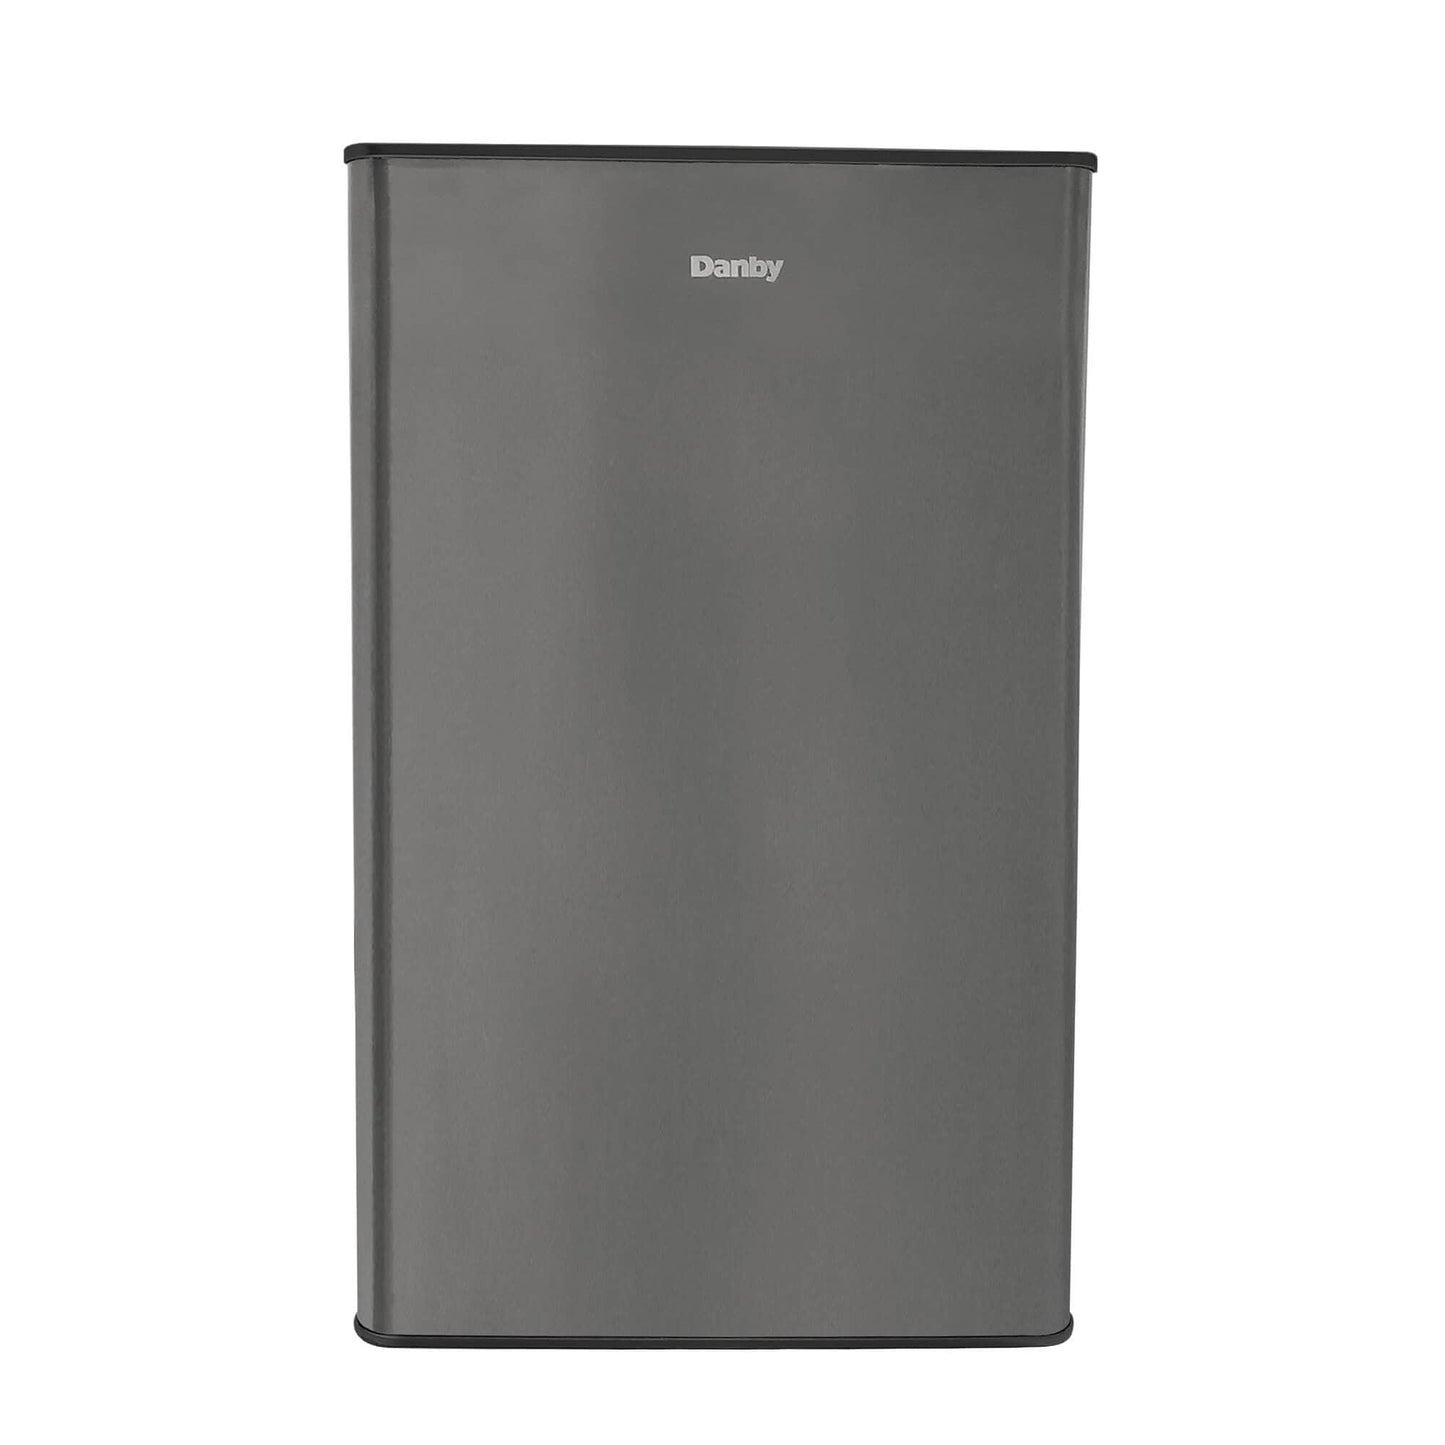 Danby Designer 4.4 Cu. Ft. Compact Refrigerator in Stainless Look